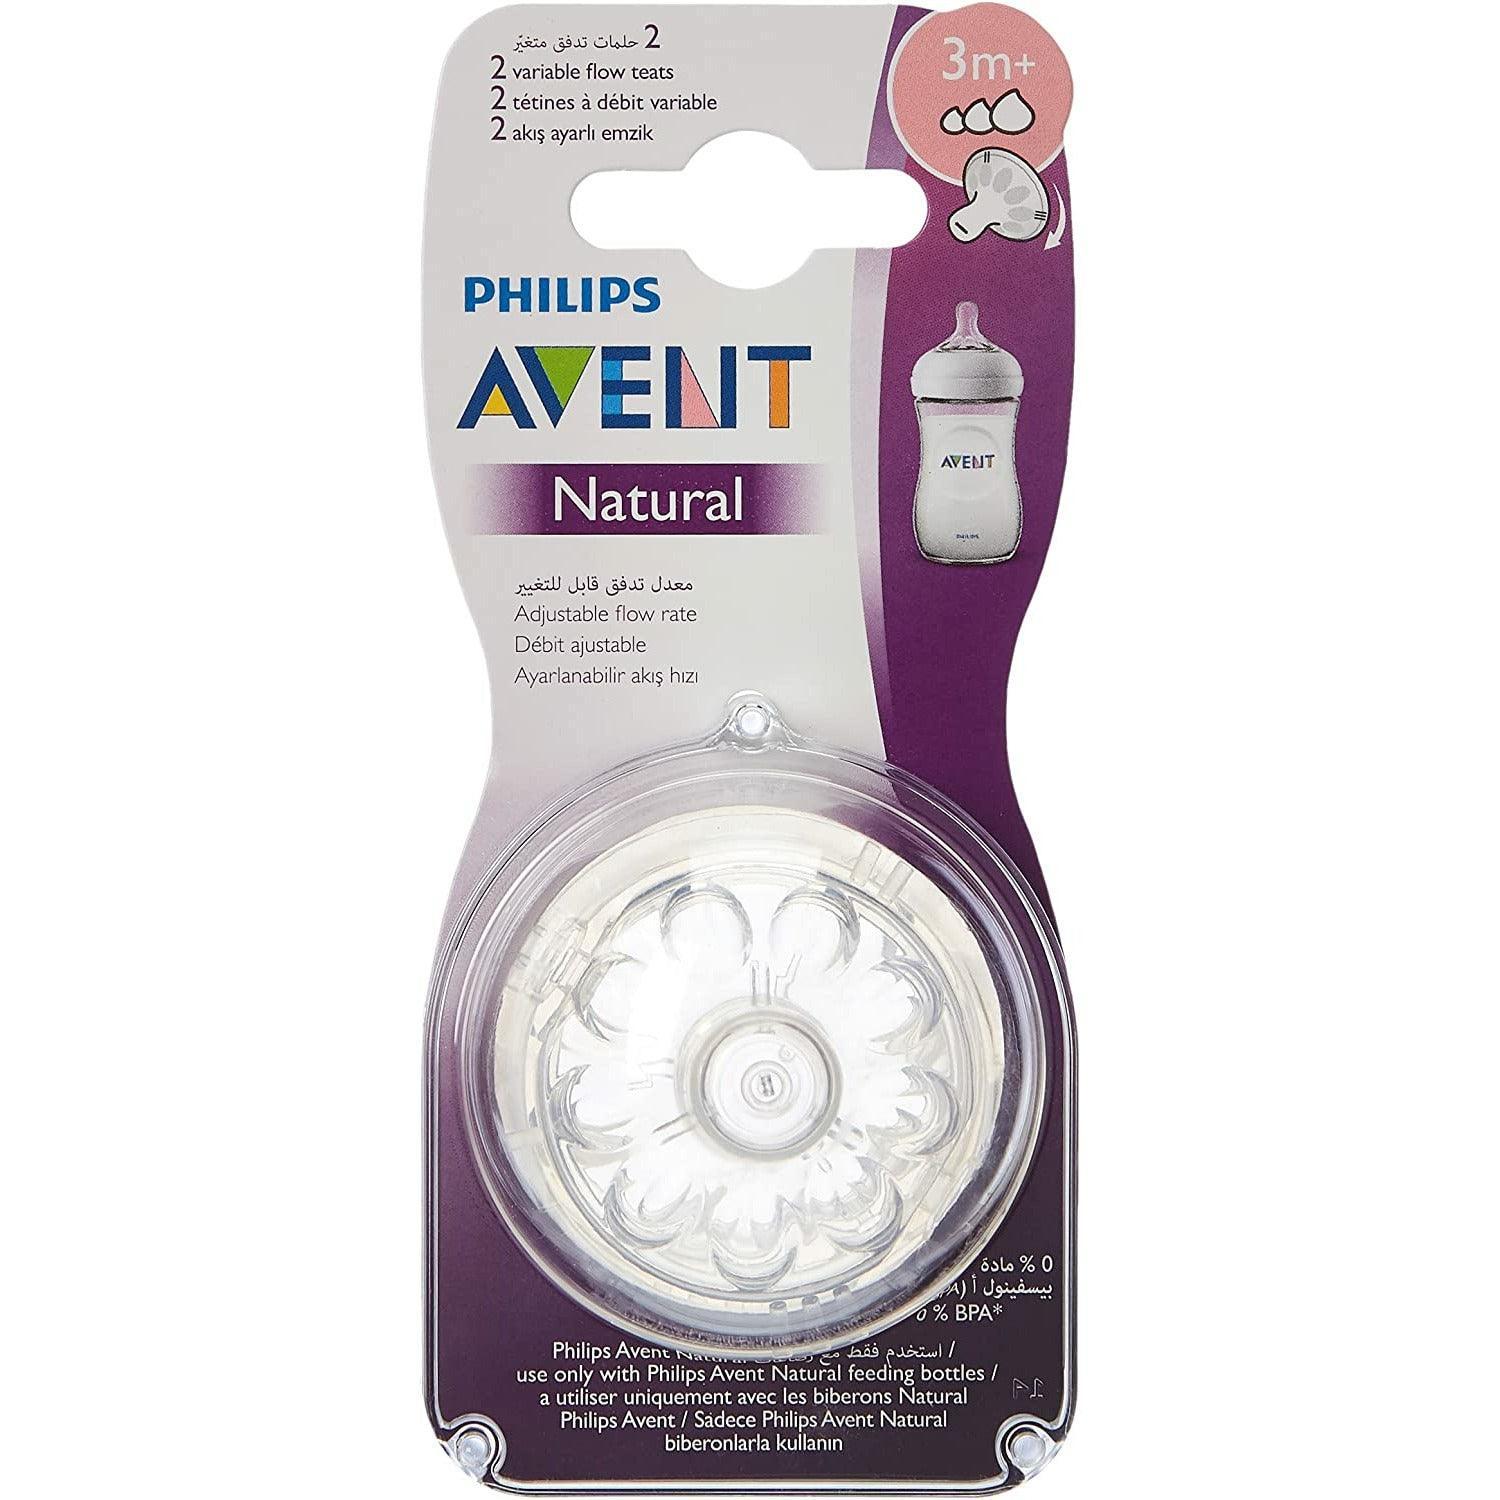 Philips Avent Natural Teat, 3 Months - Ourkids - Philips Avent